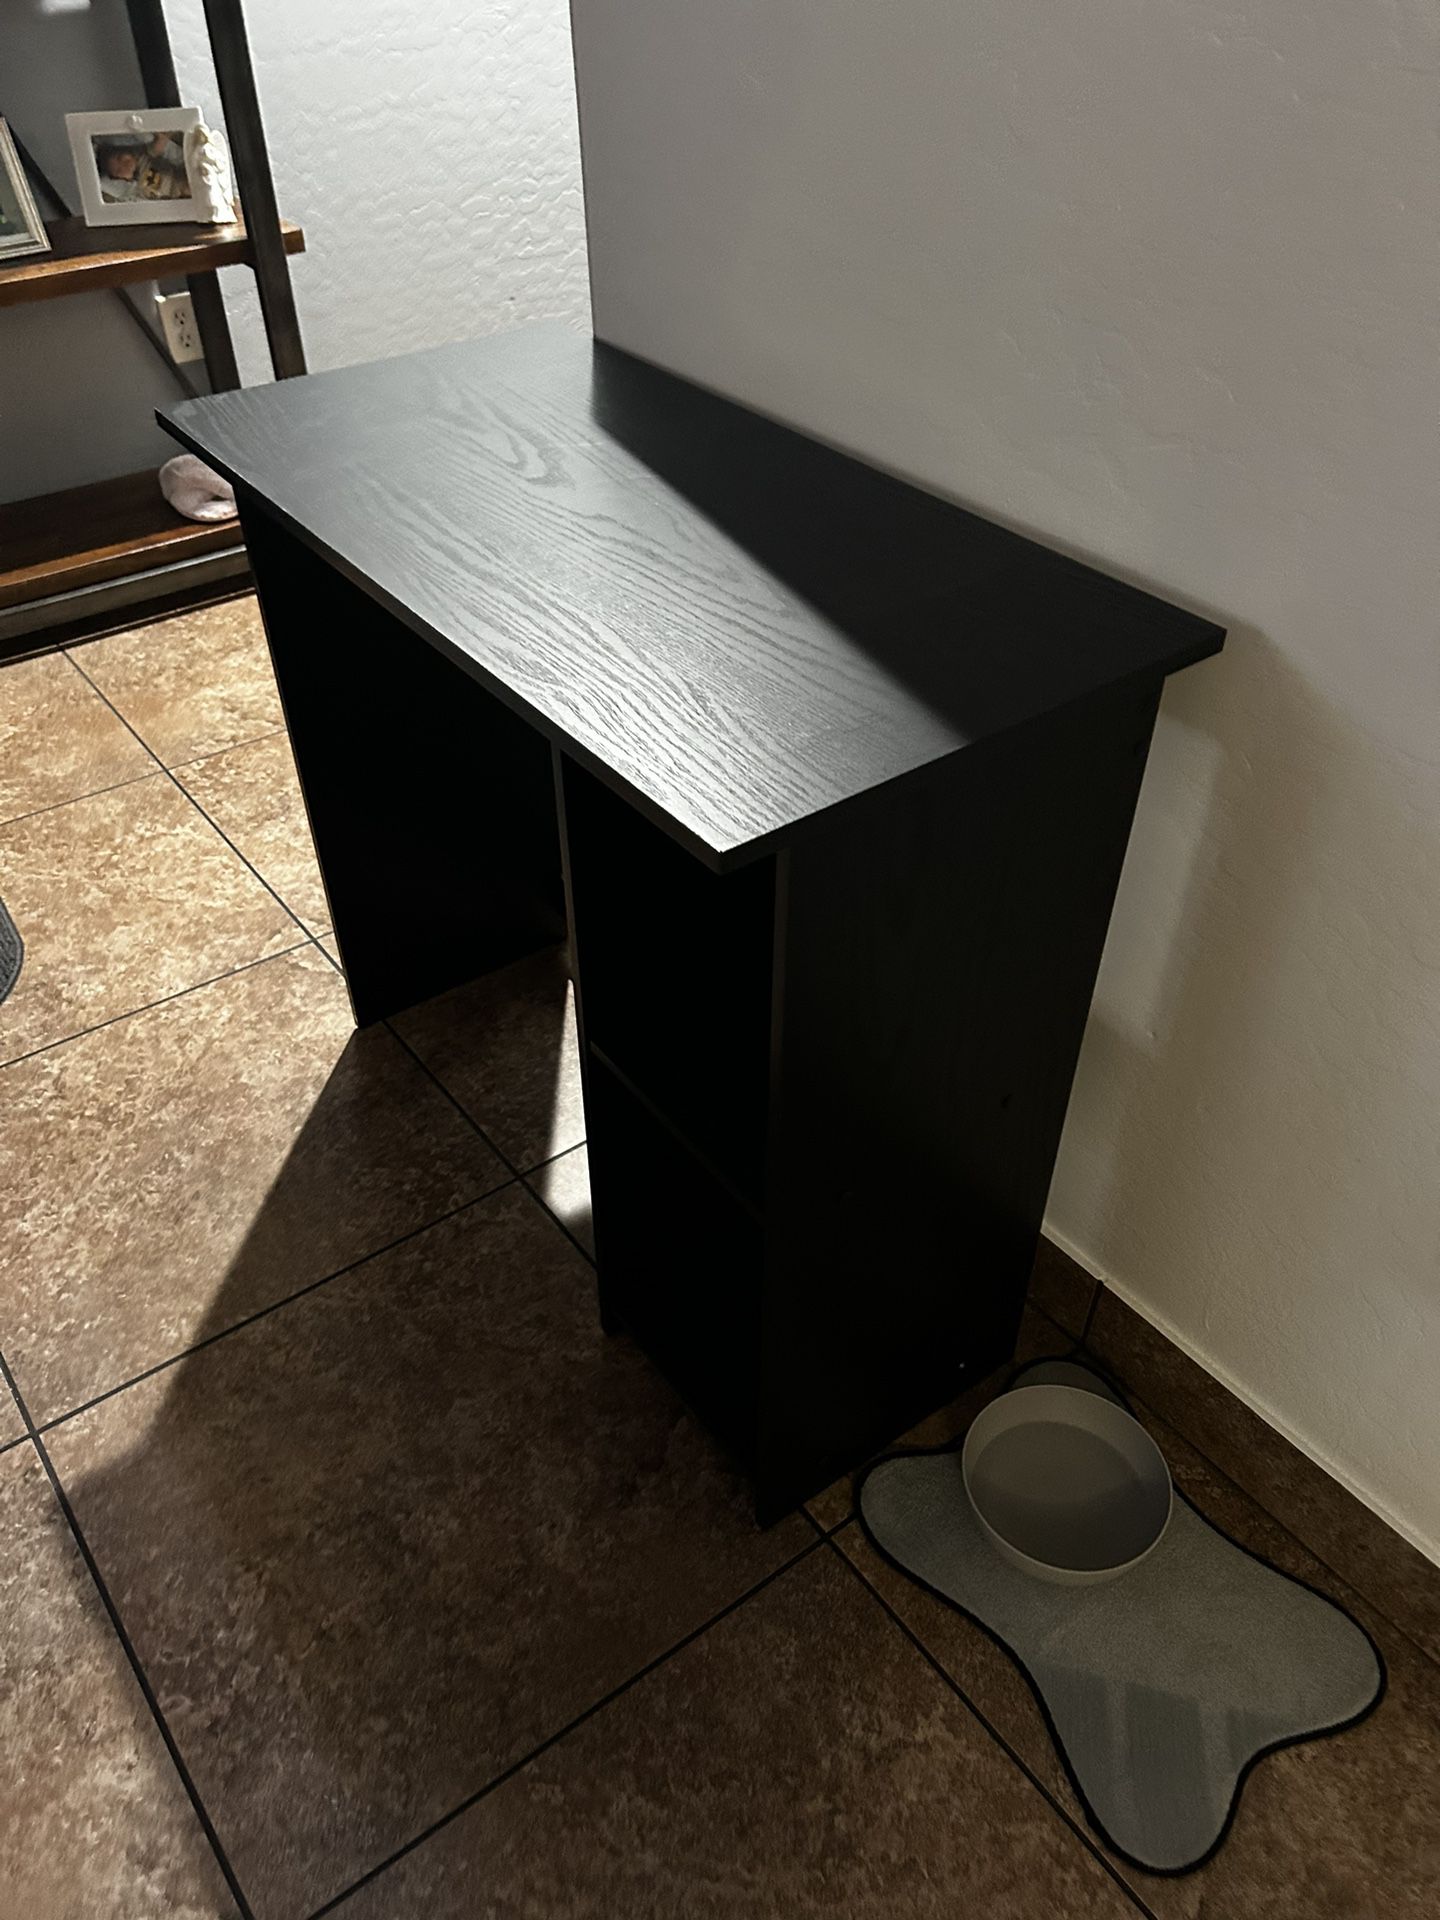 Small Black Desk No Stains Or Damage Asking 15dollars 